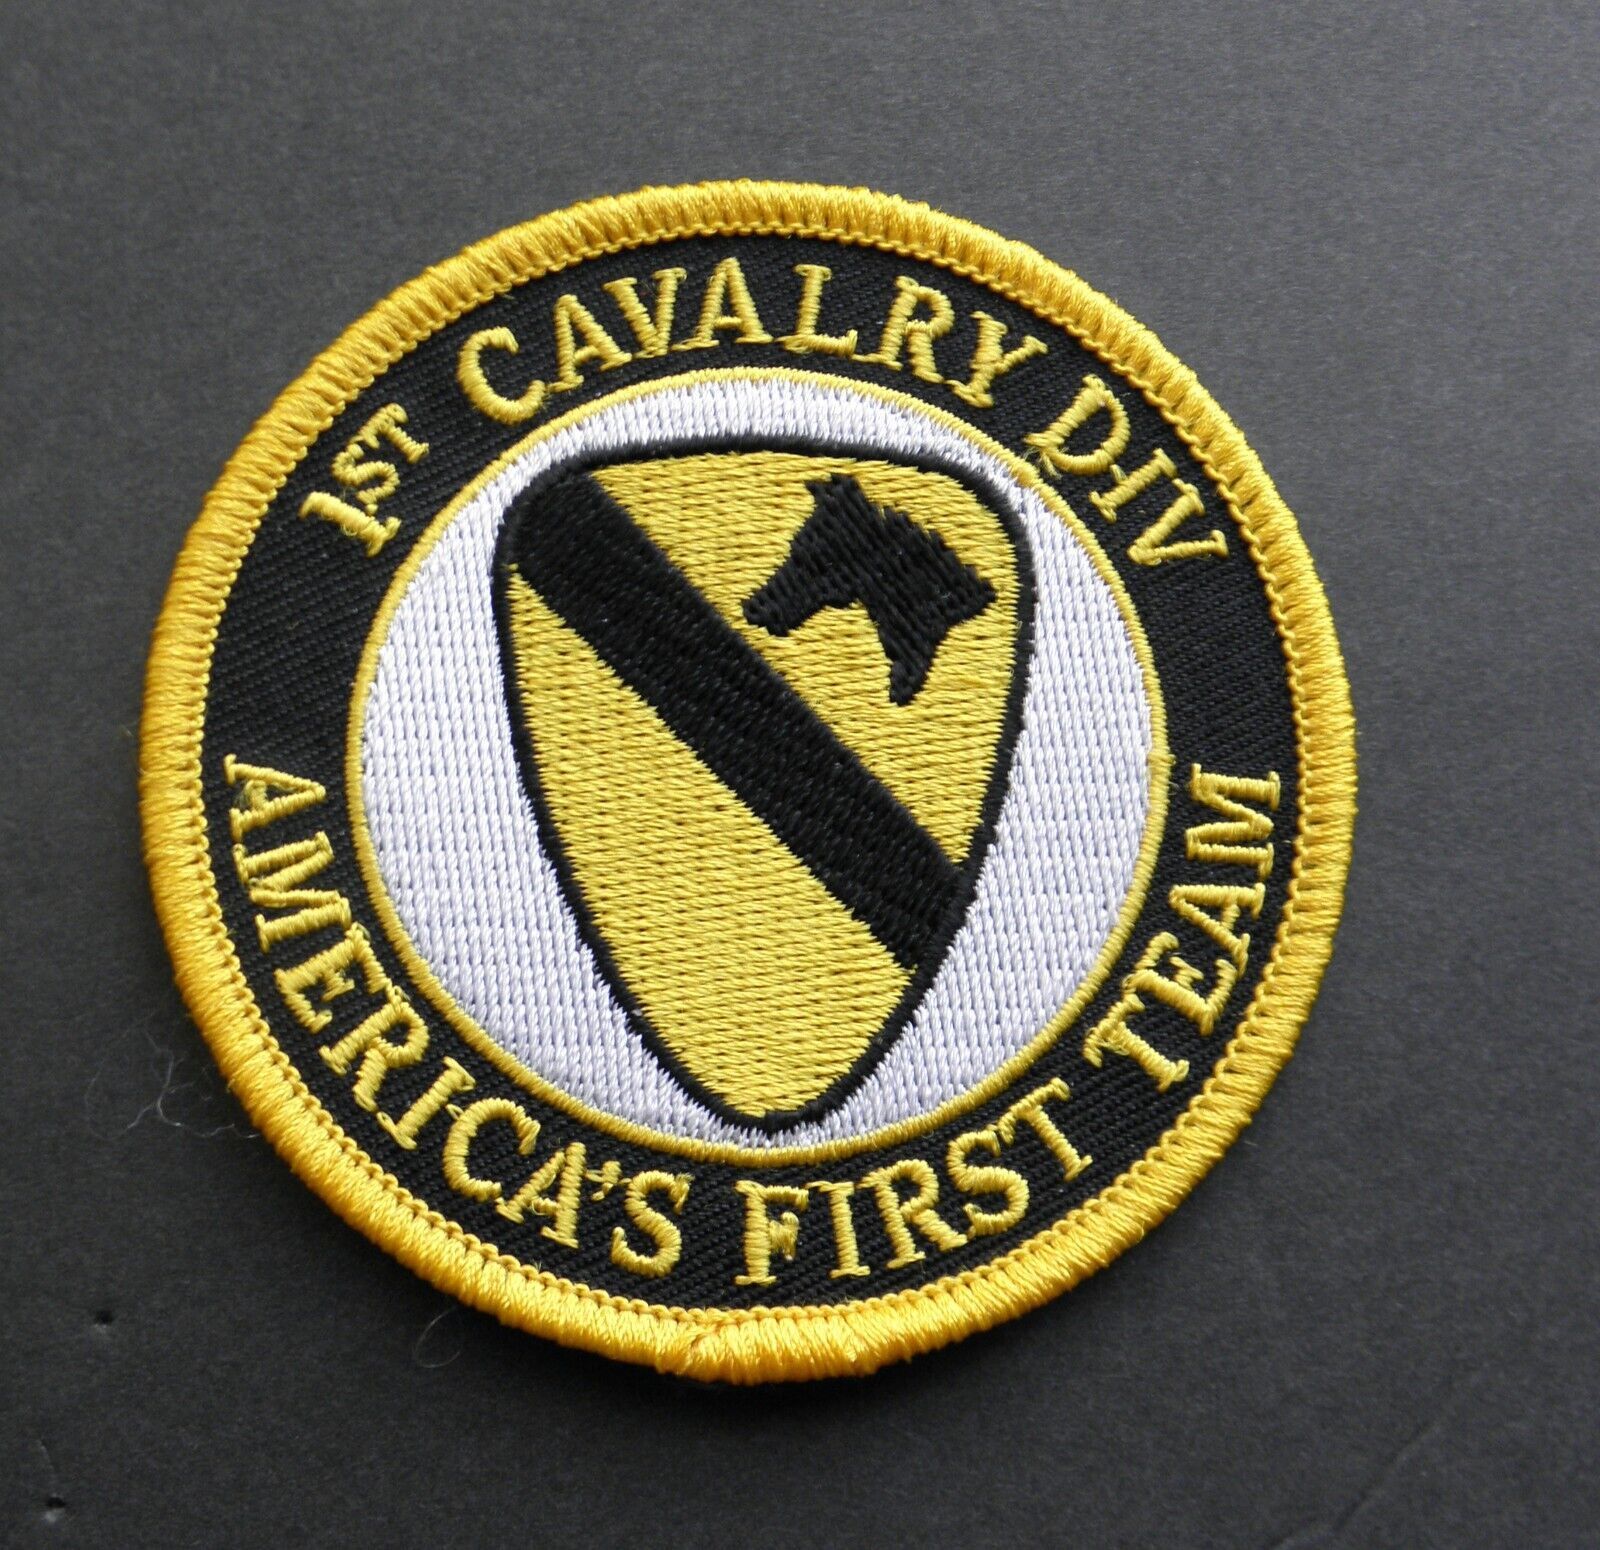 ARMY 1ST CAVALRY DIVISION EMBROIDERED PATCH 3 INCHES - $5.74